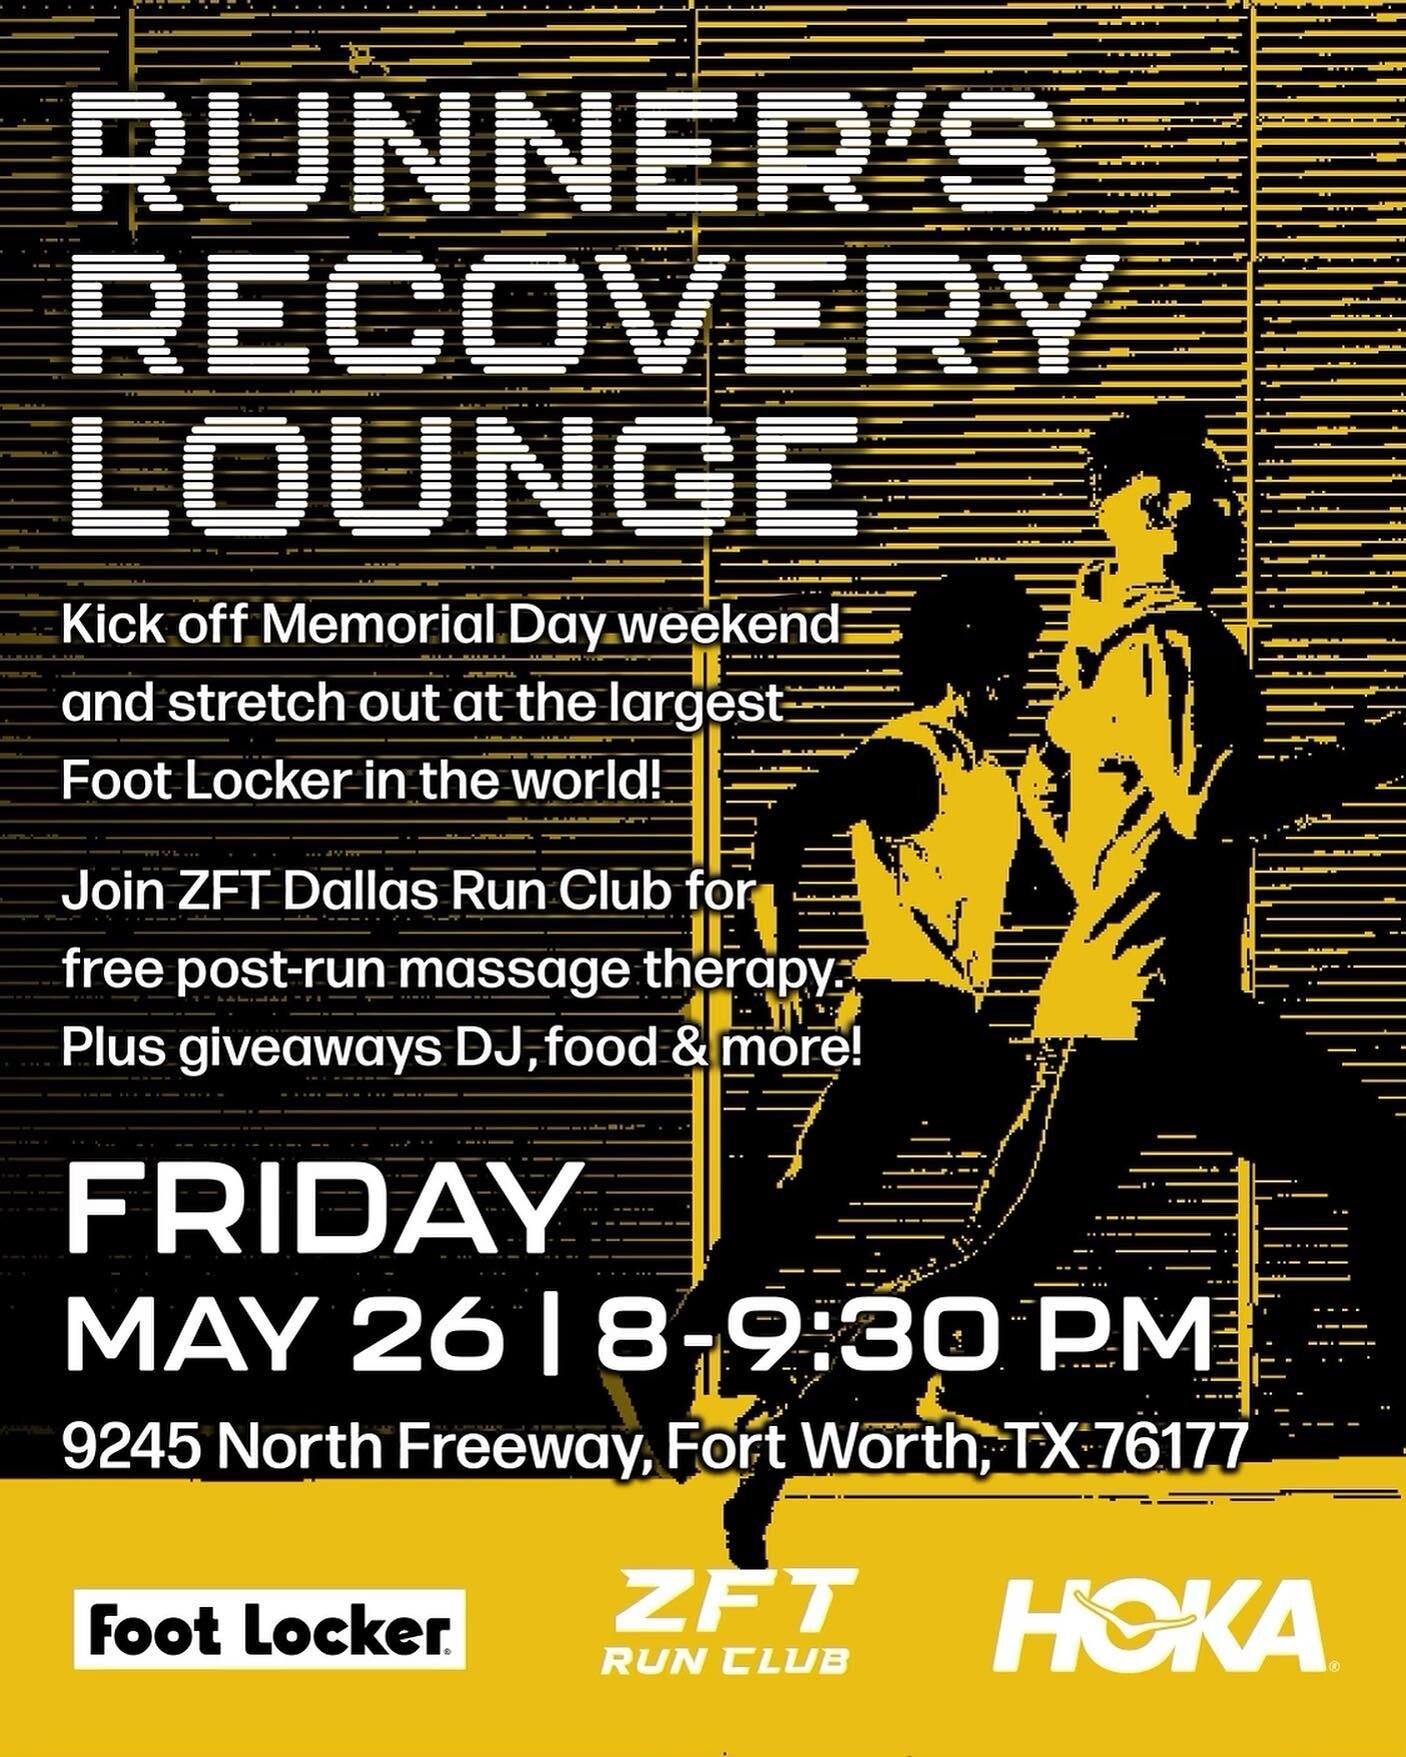 Event Alert!!!!

Join us for a ZFT Runner&rsquo;s Recovery Lounge experience on Fri&rsquo;, May 26th from 8 PM to 9:30 PM at the brand-new Foot Locker Powerhouse store located at 9245 North Freeway, Fort Worth, TX 76177. It&rsquo;s brought to you by 